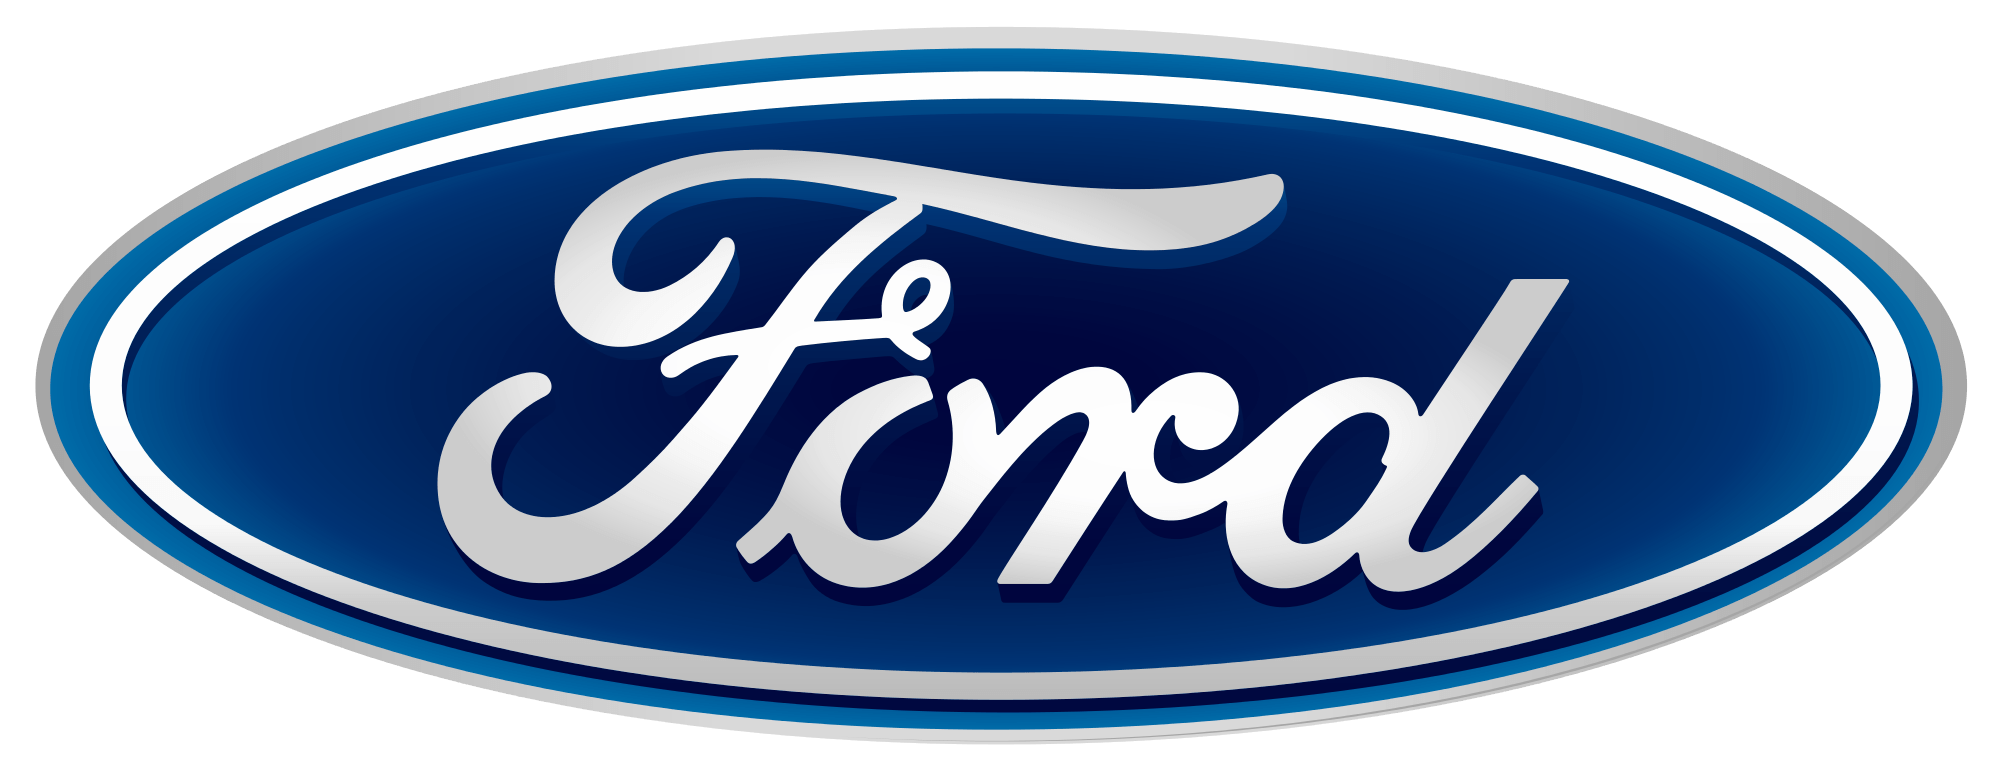 High Res Ford Logo - File:Ford logo.svg - Wikimedia Commons